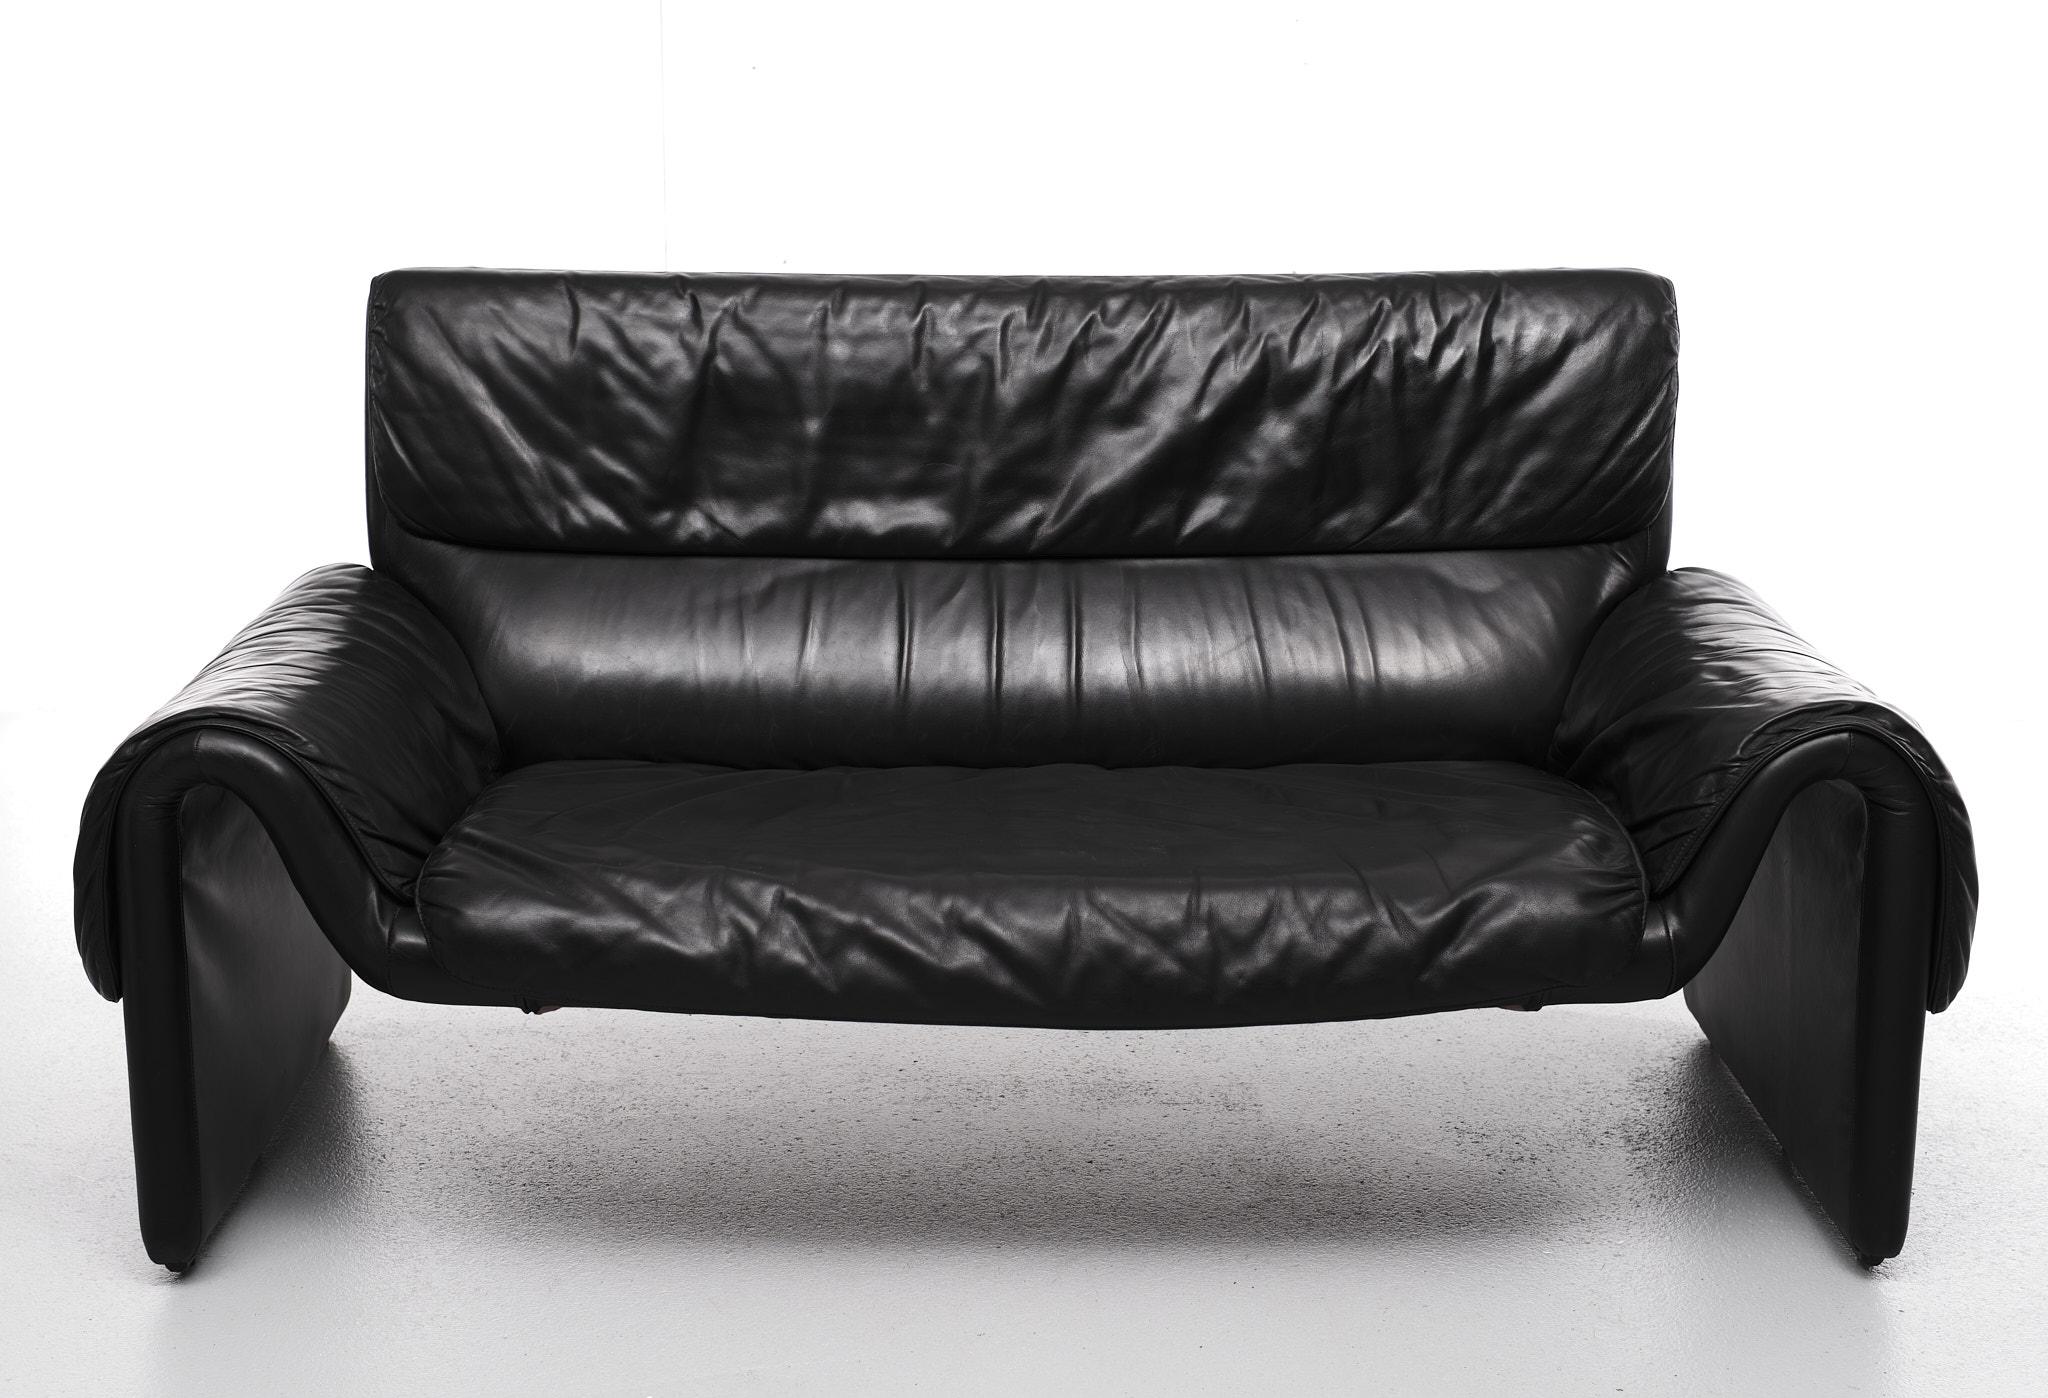 Top Quality sofa from Switzerland. Love the curved shape of this sofa.
Smooth soft Black leather. Wonderful condition.